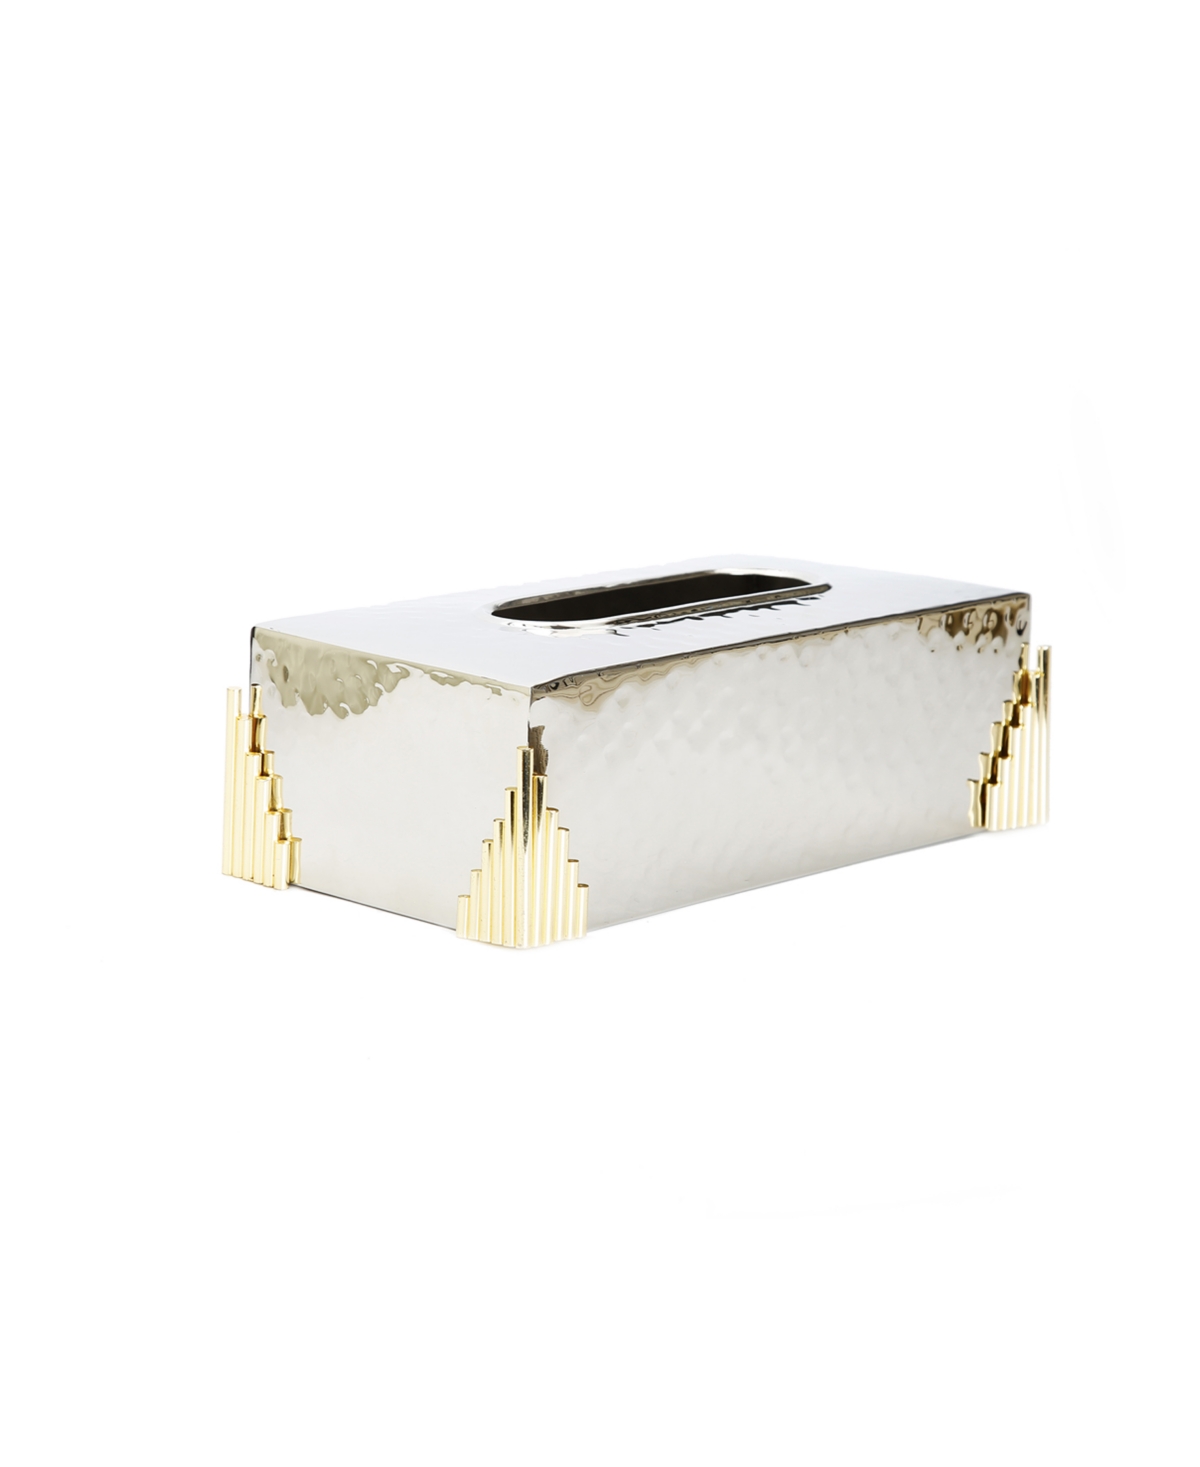 Stainless Steel Tissue Box with Symmetrical Design - Gold